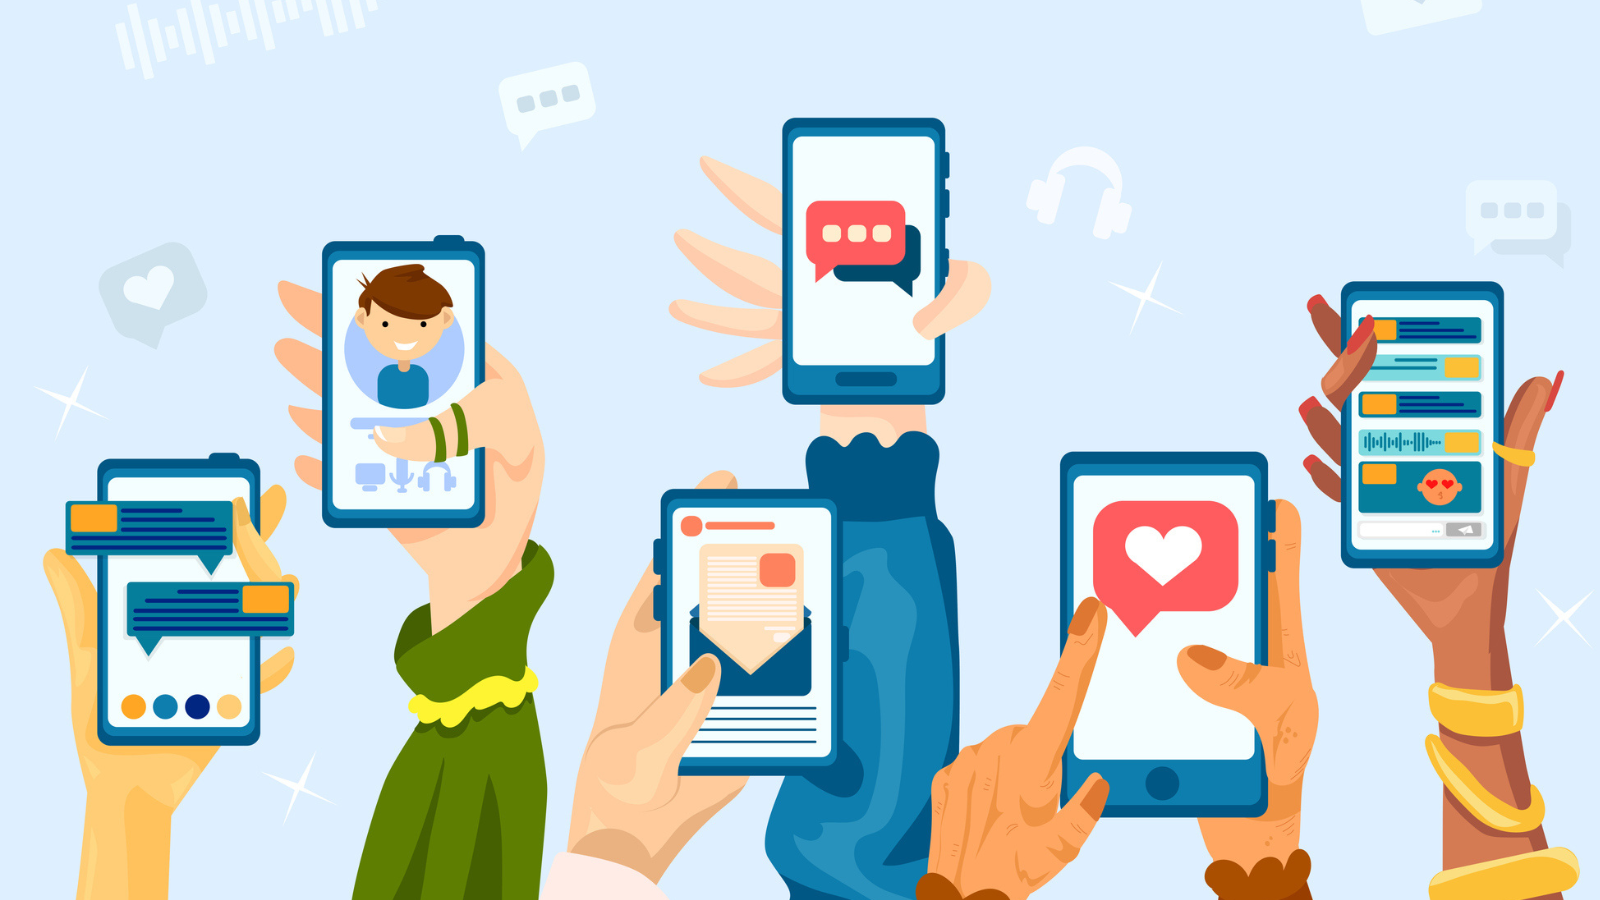 People using social media and phone use vector illustration